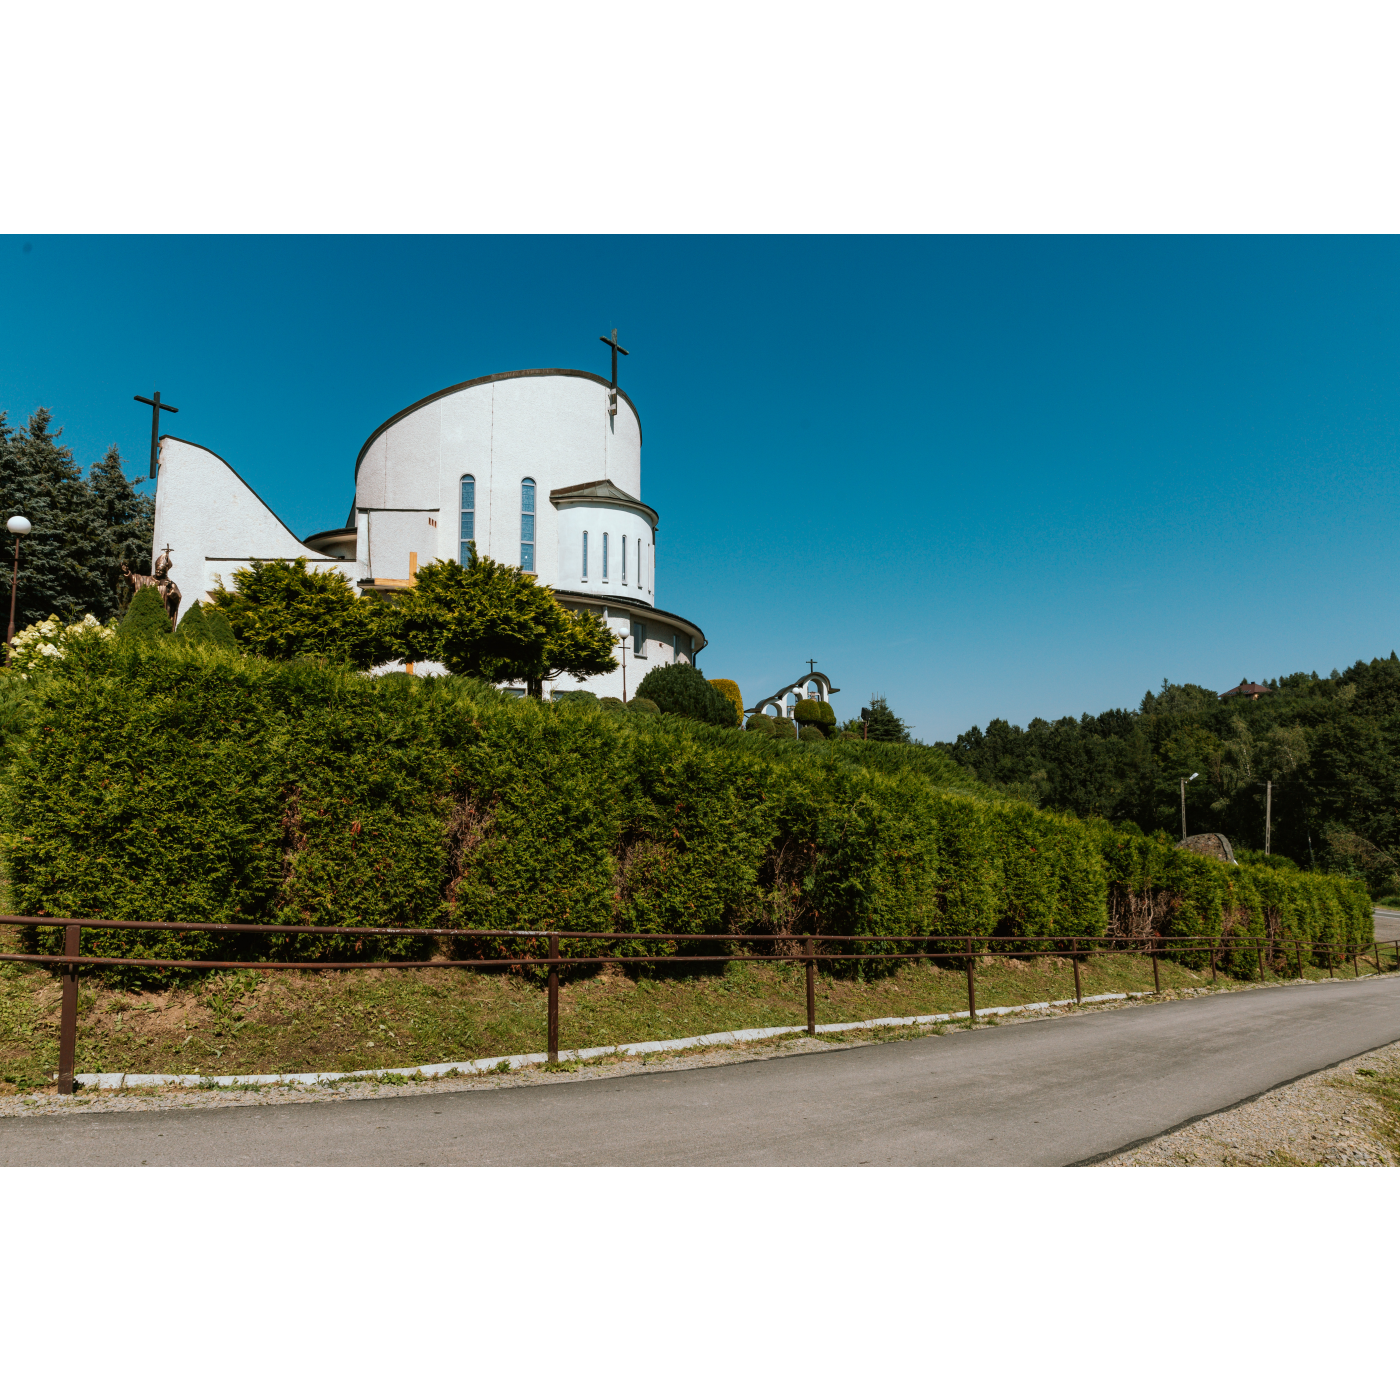 Semicircular facade of a white church on a hill, green vegetation at the bottom, blue sky in the background